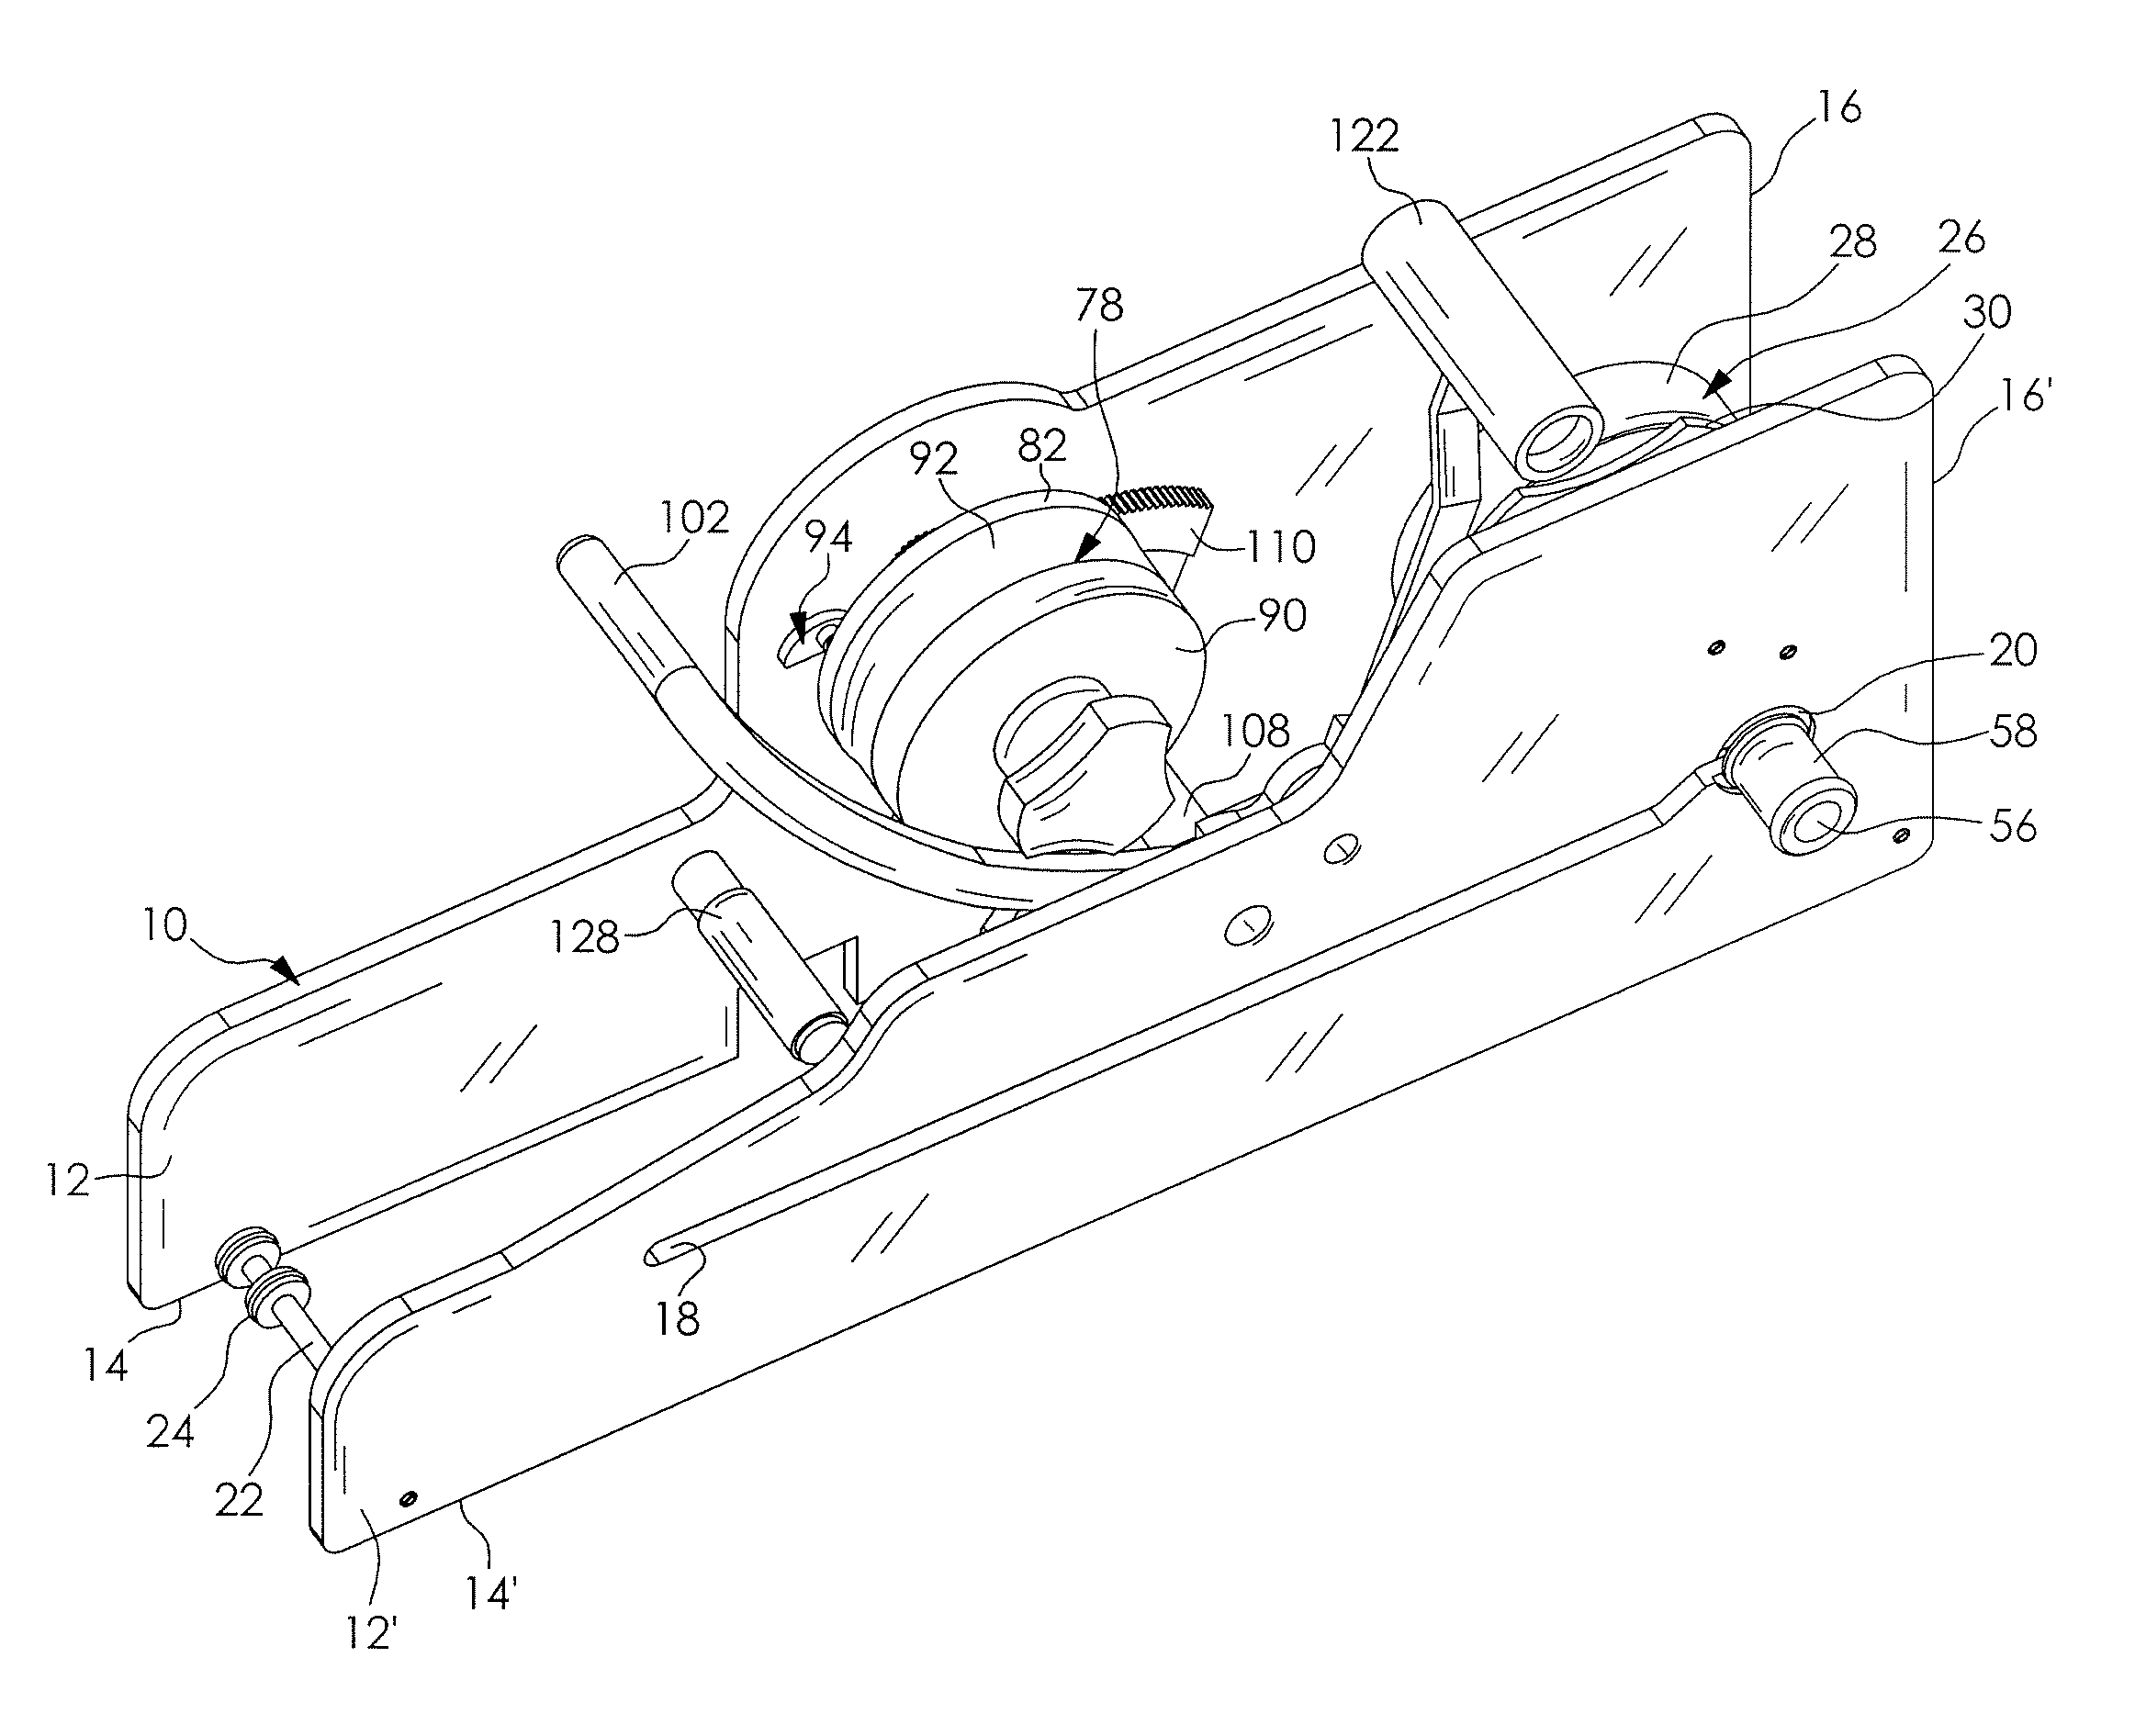 Device for testing the adhesion of a coating to a substrate and method of using same